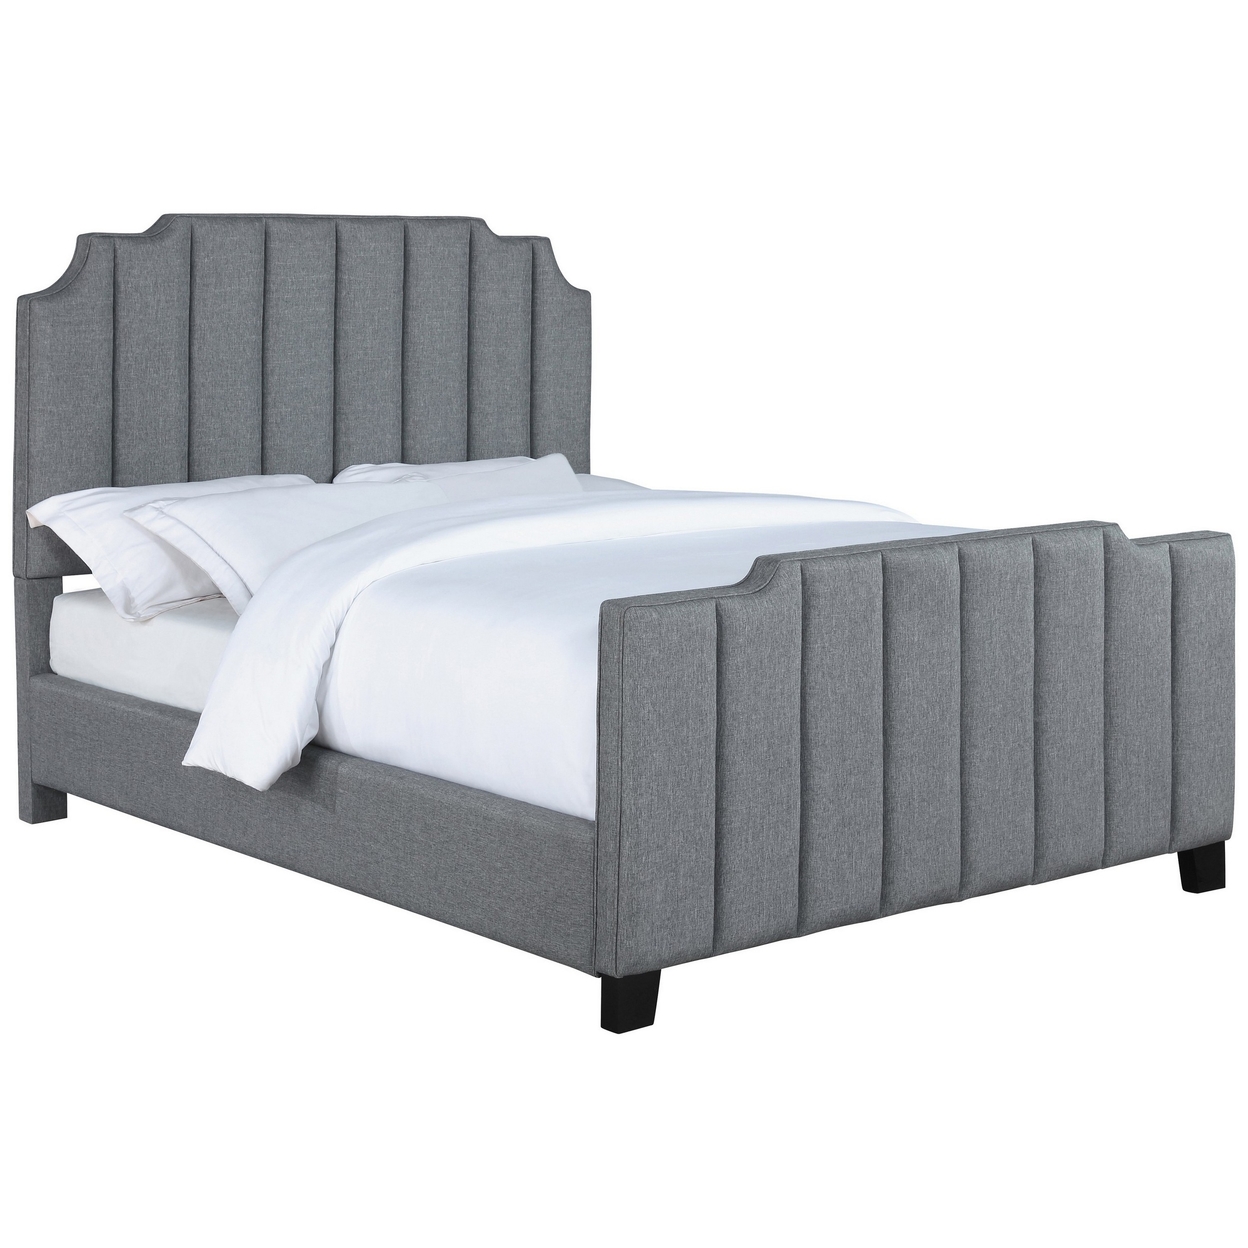 Ion Notched Queen Panel Bed, Vertical Channel Tufted, Light Gray Upholstery- Saltoro Sherpi